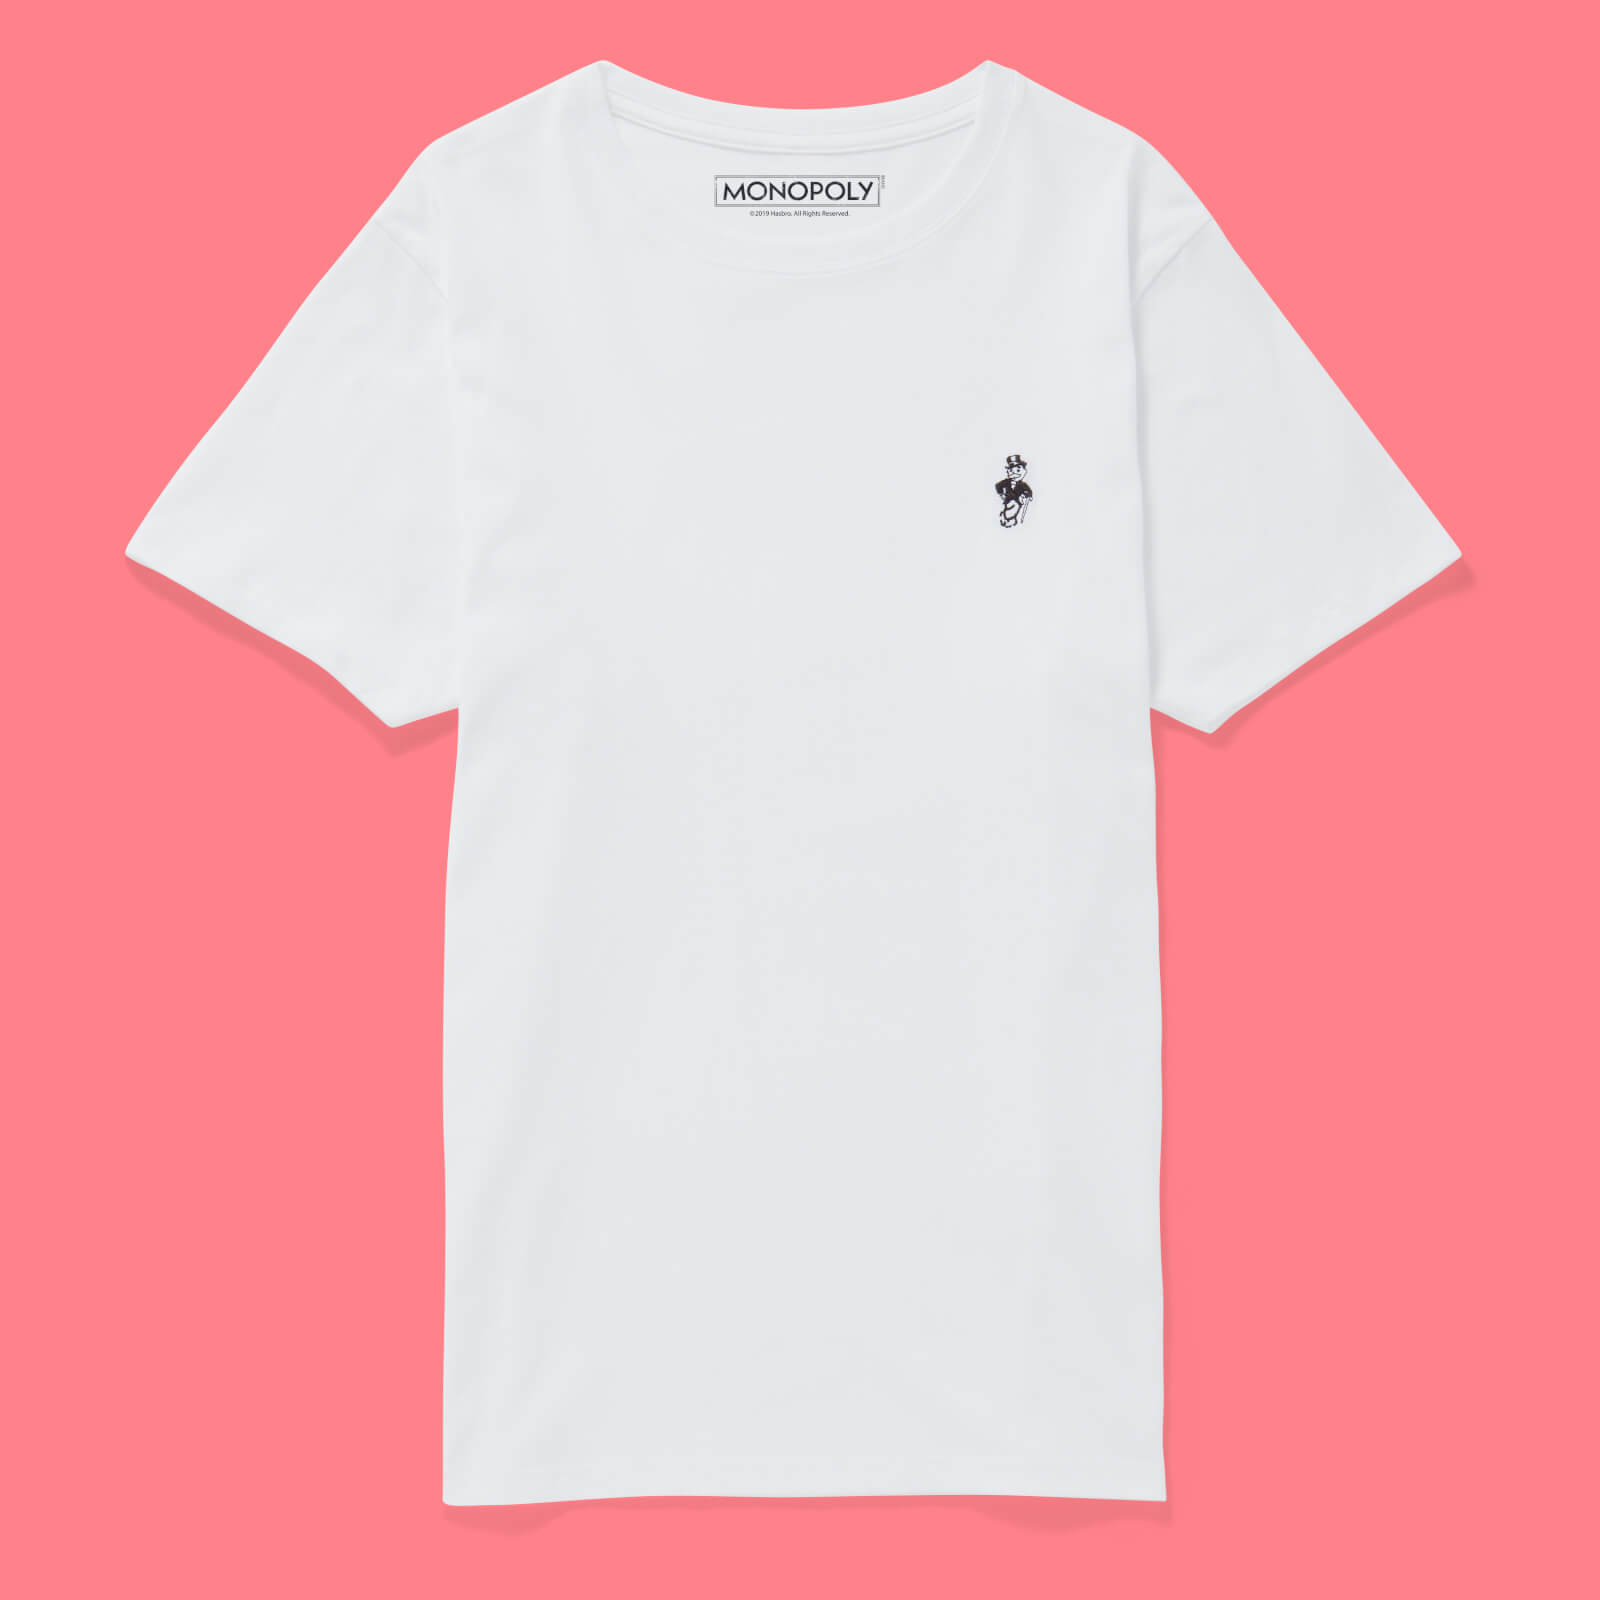 Monopoly Mr Monopoly Embroidered T-Shirt - White - L - Weiß von Monopoly